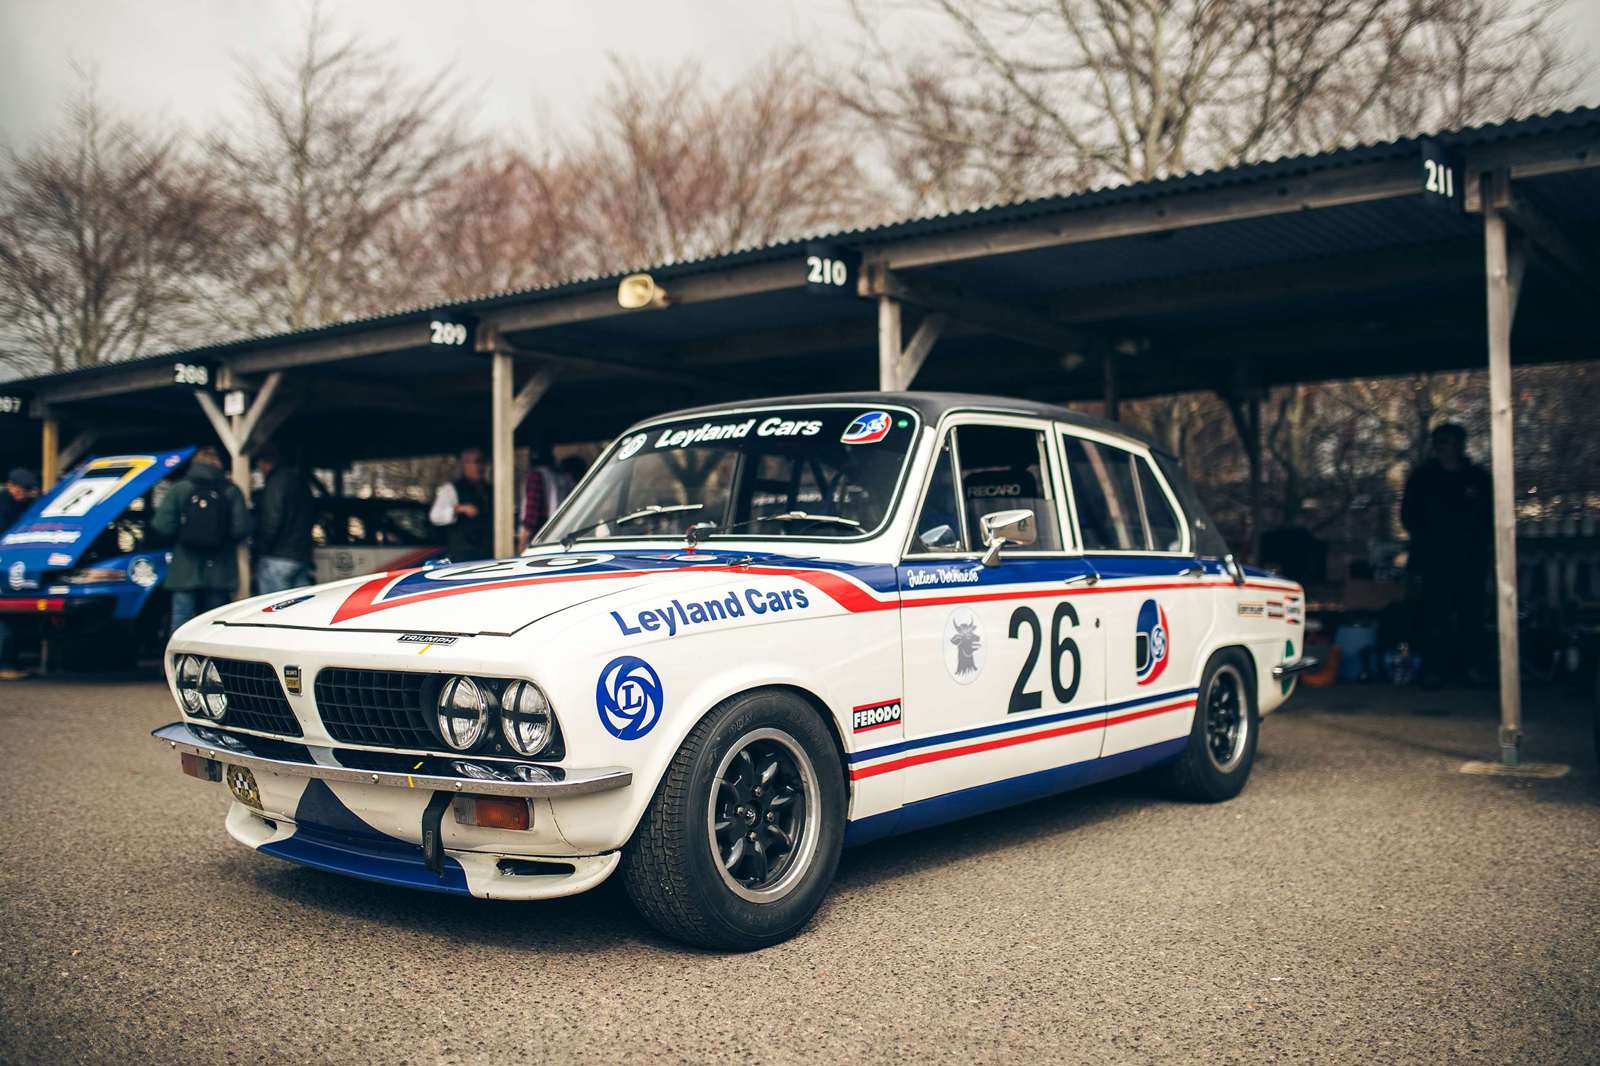 Triumph Dolomite has a racer day one